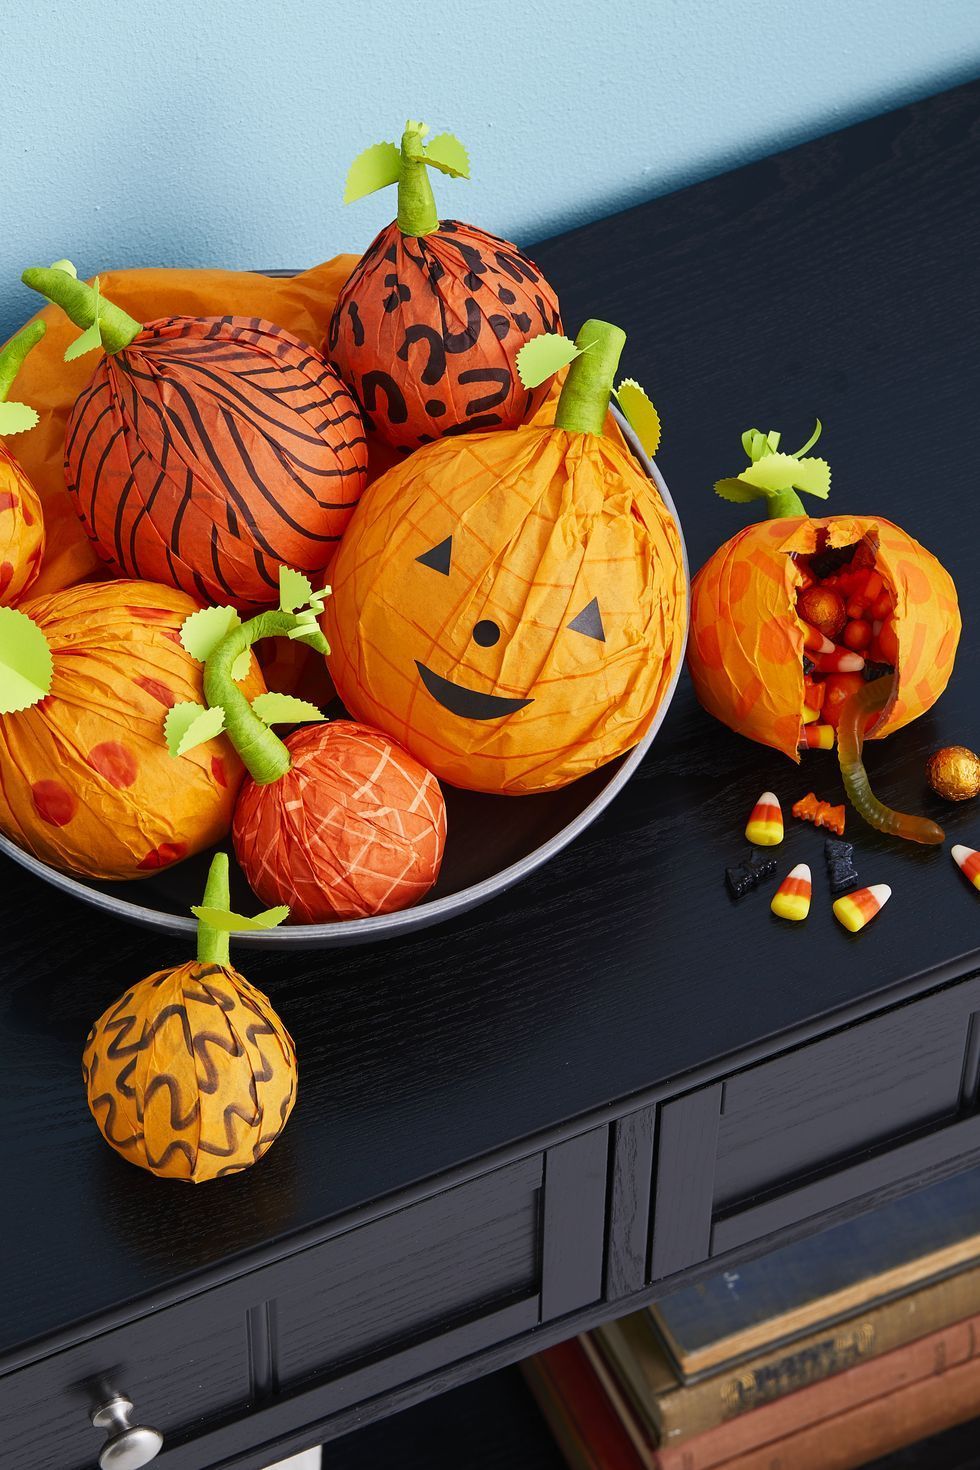 50+ Easy Halloween Party Ideas — Best Halloween Party Themes